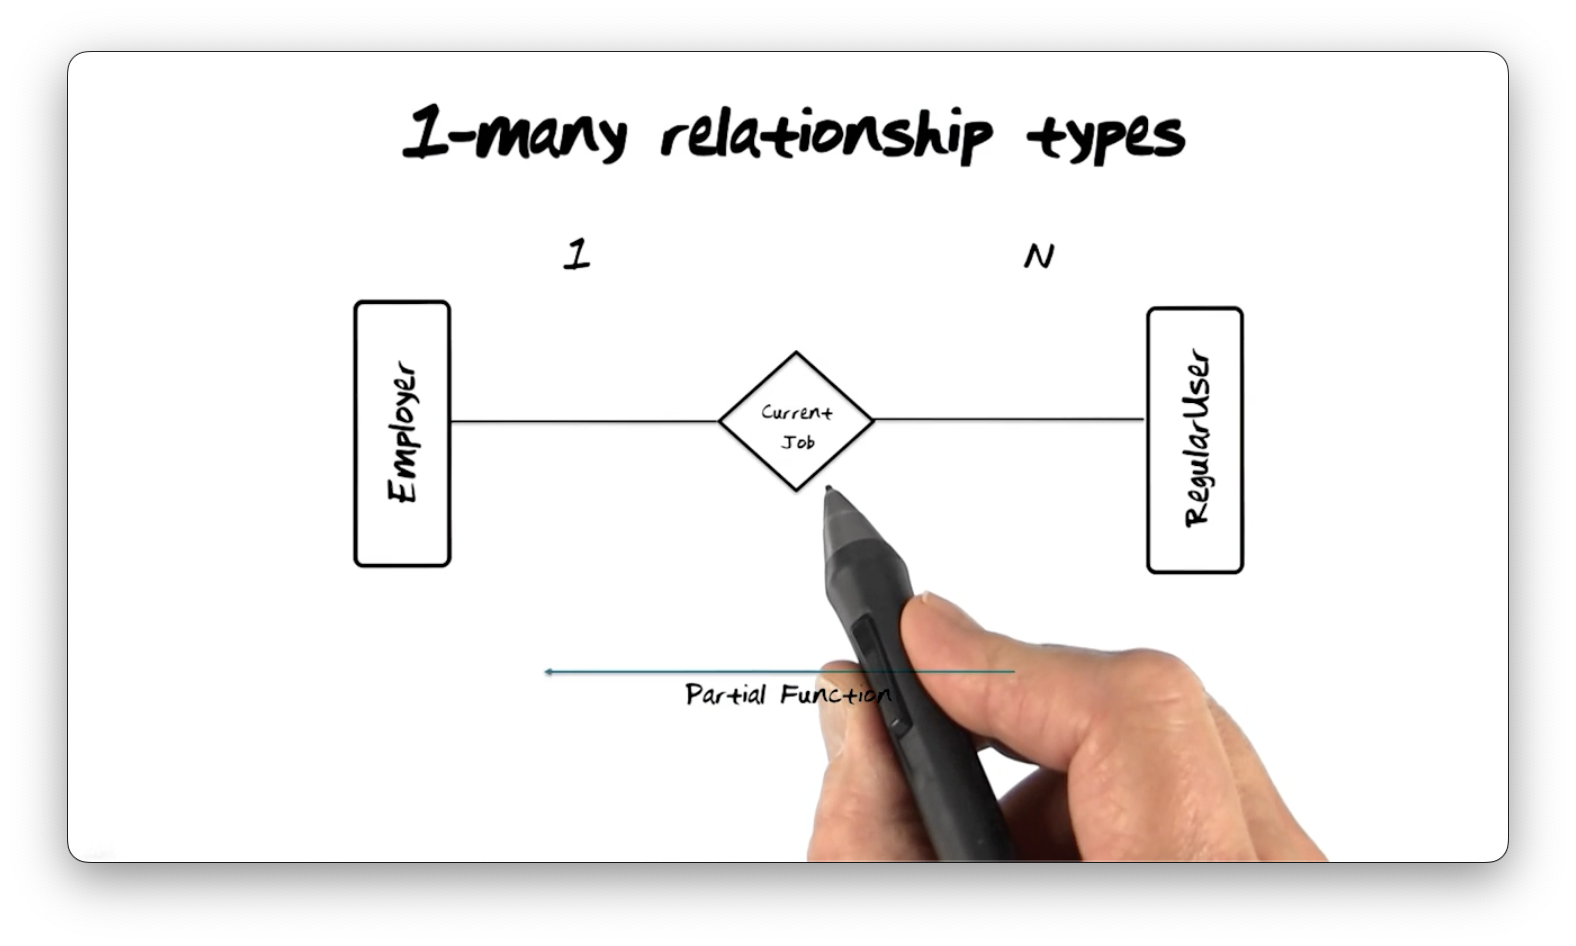 A one-to-many relationship type between a single employer and zero or more
regular users.